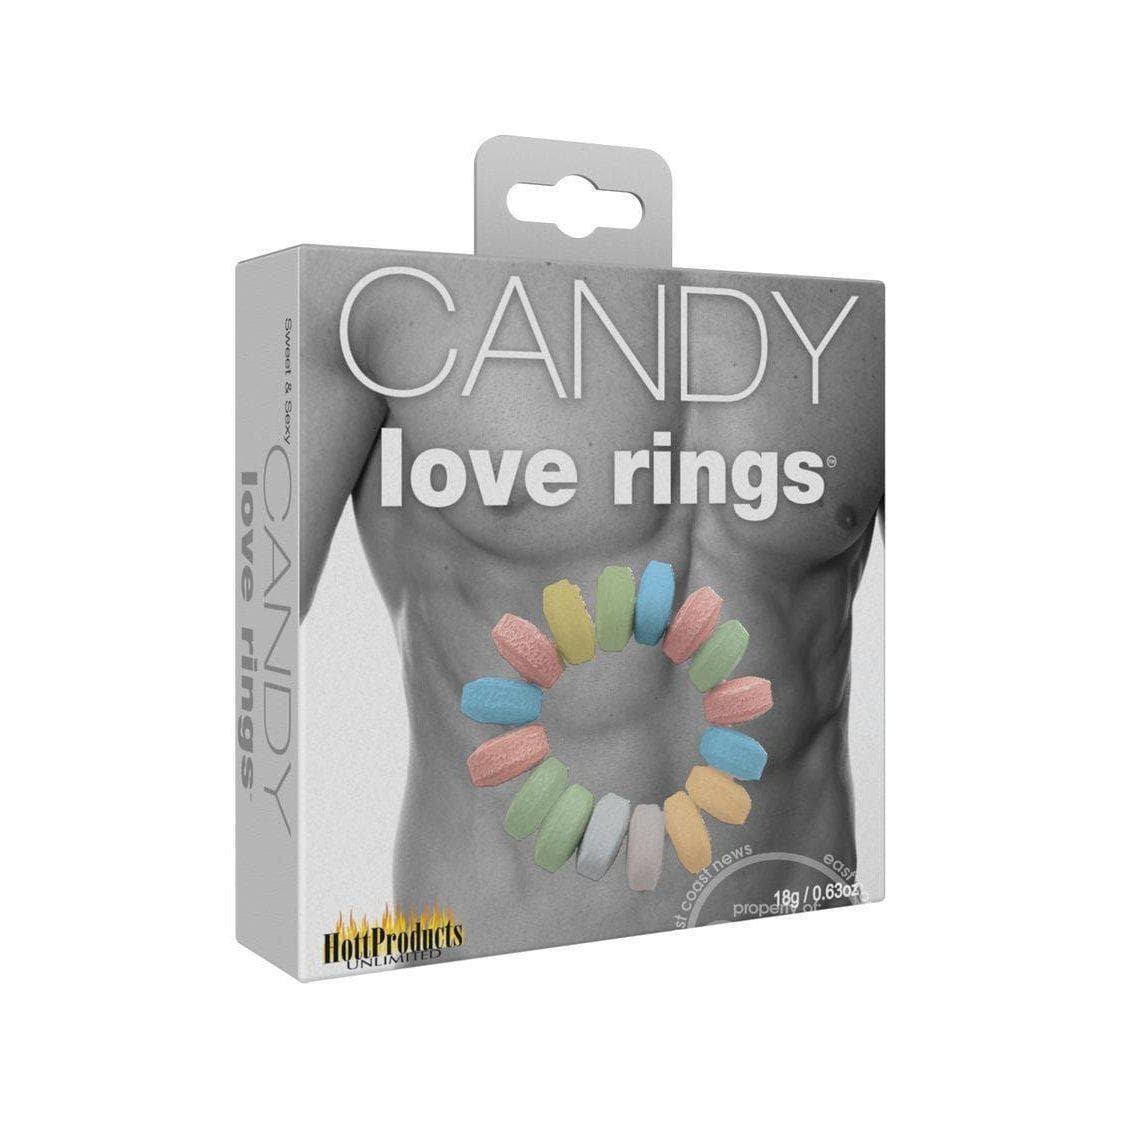 Edibles Candy Cock Ring 3-Pack 18g